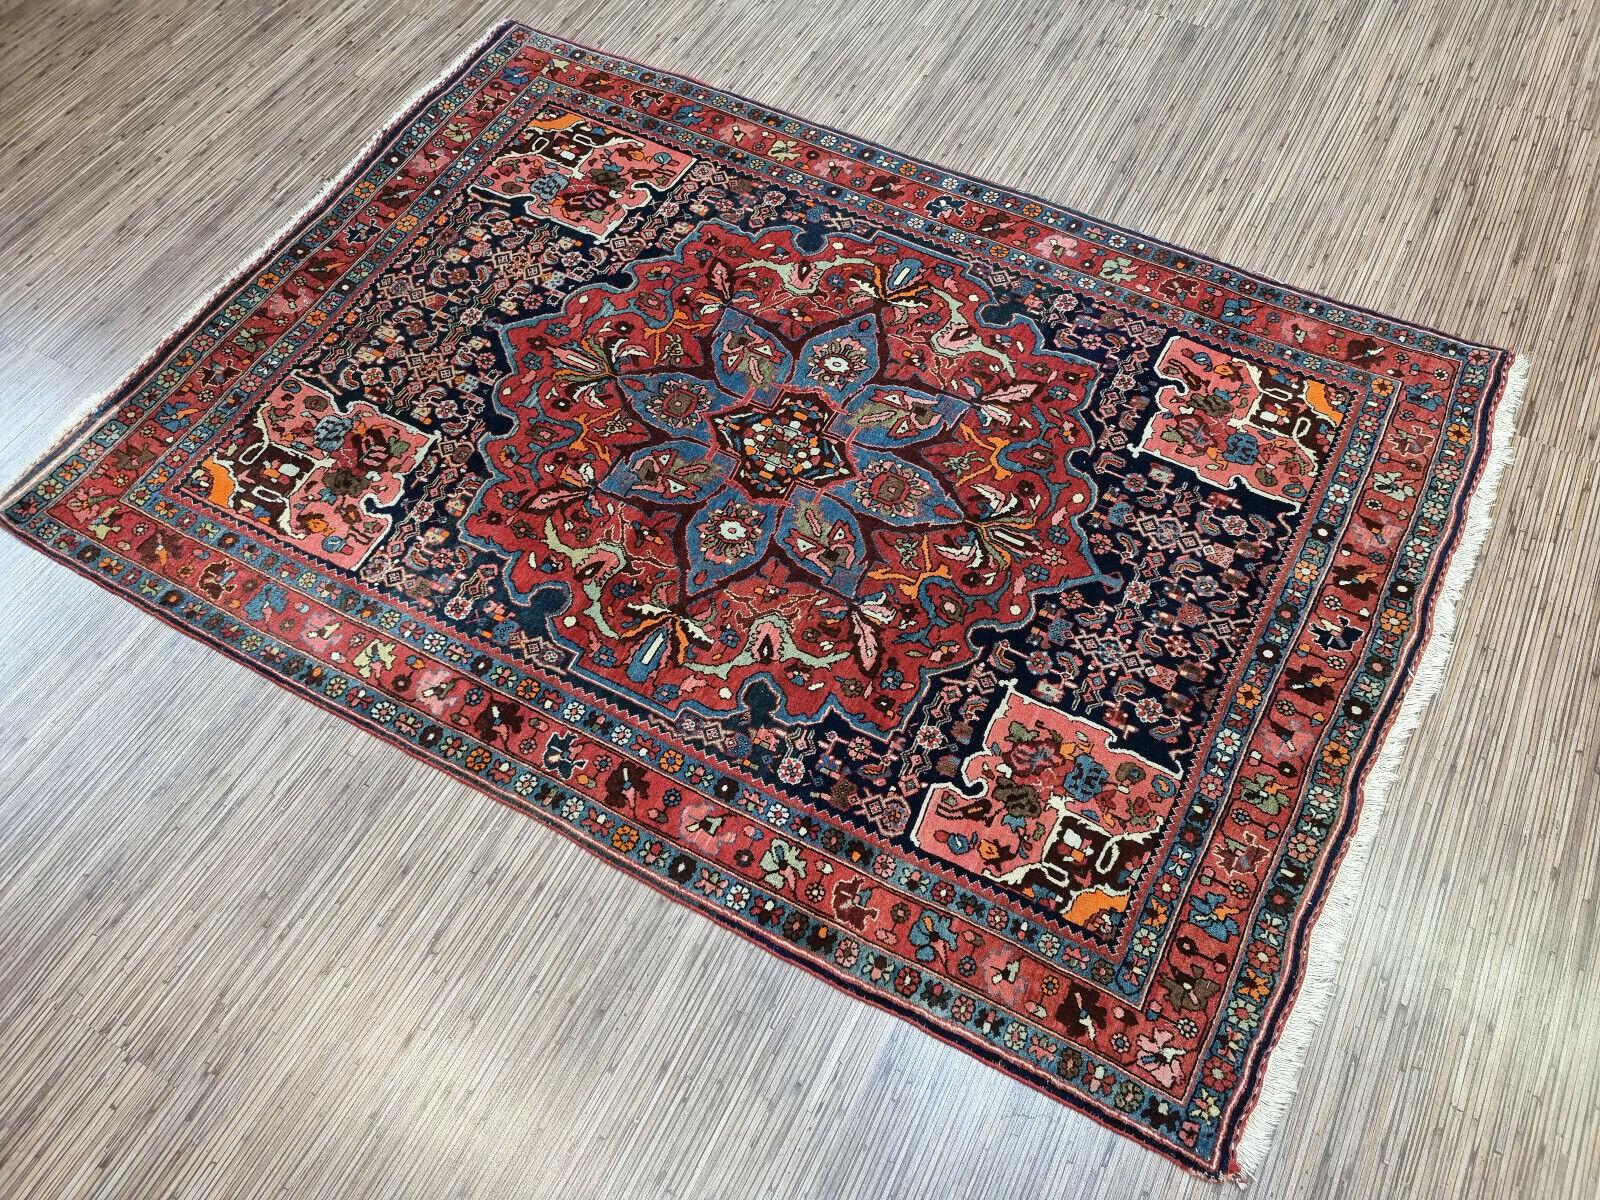 Bring home a piece of history and art with our Handmade Antique Persian Style Bidjar Rug. This rug was made in the 1910s, measuring 3.8’ x 5.3’, suitable for small to medium spaces.

The rug features a stunning design, with a large medallion at the